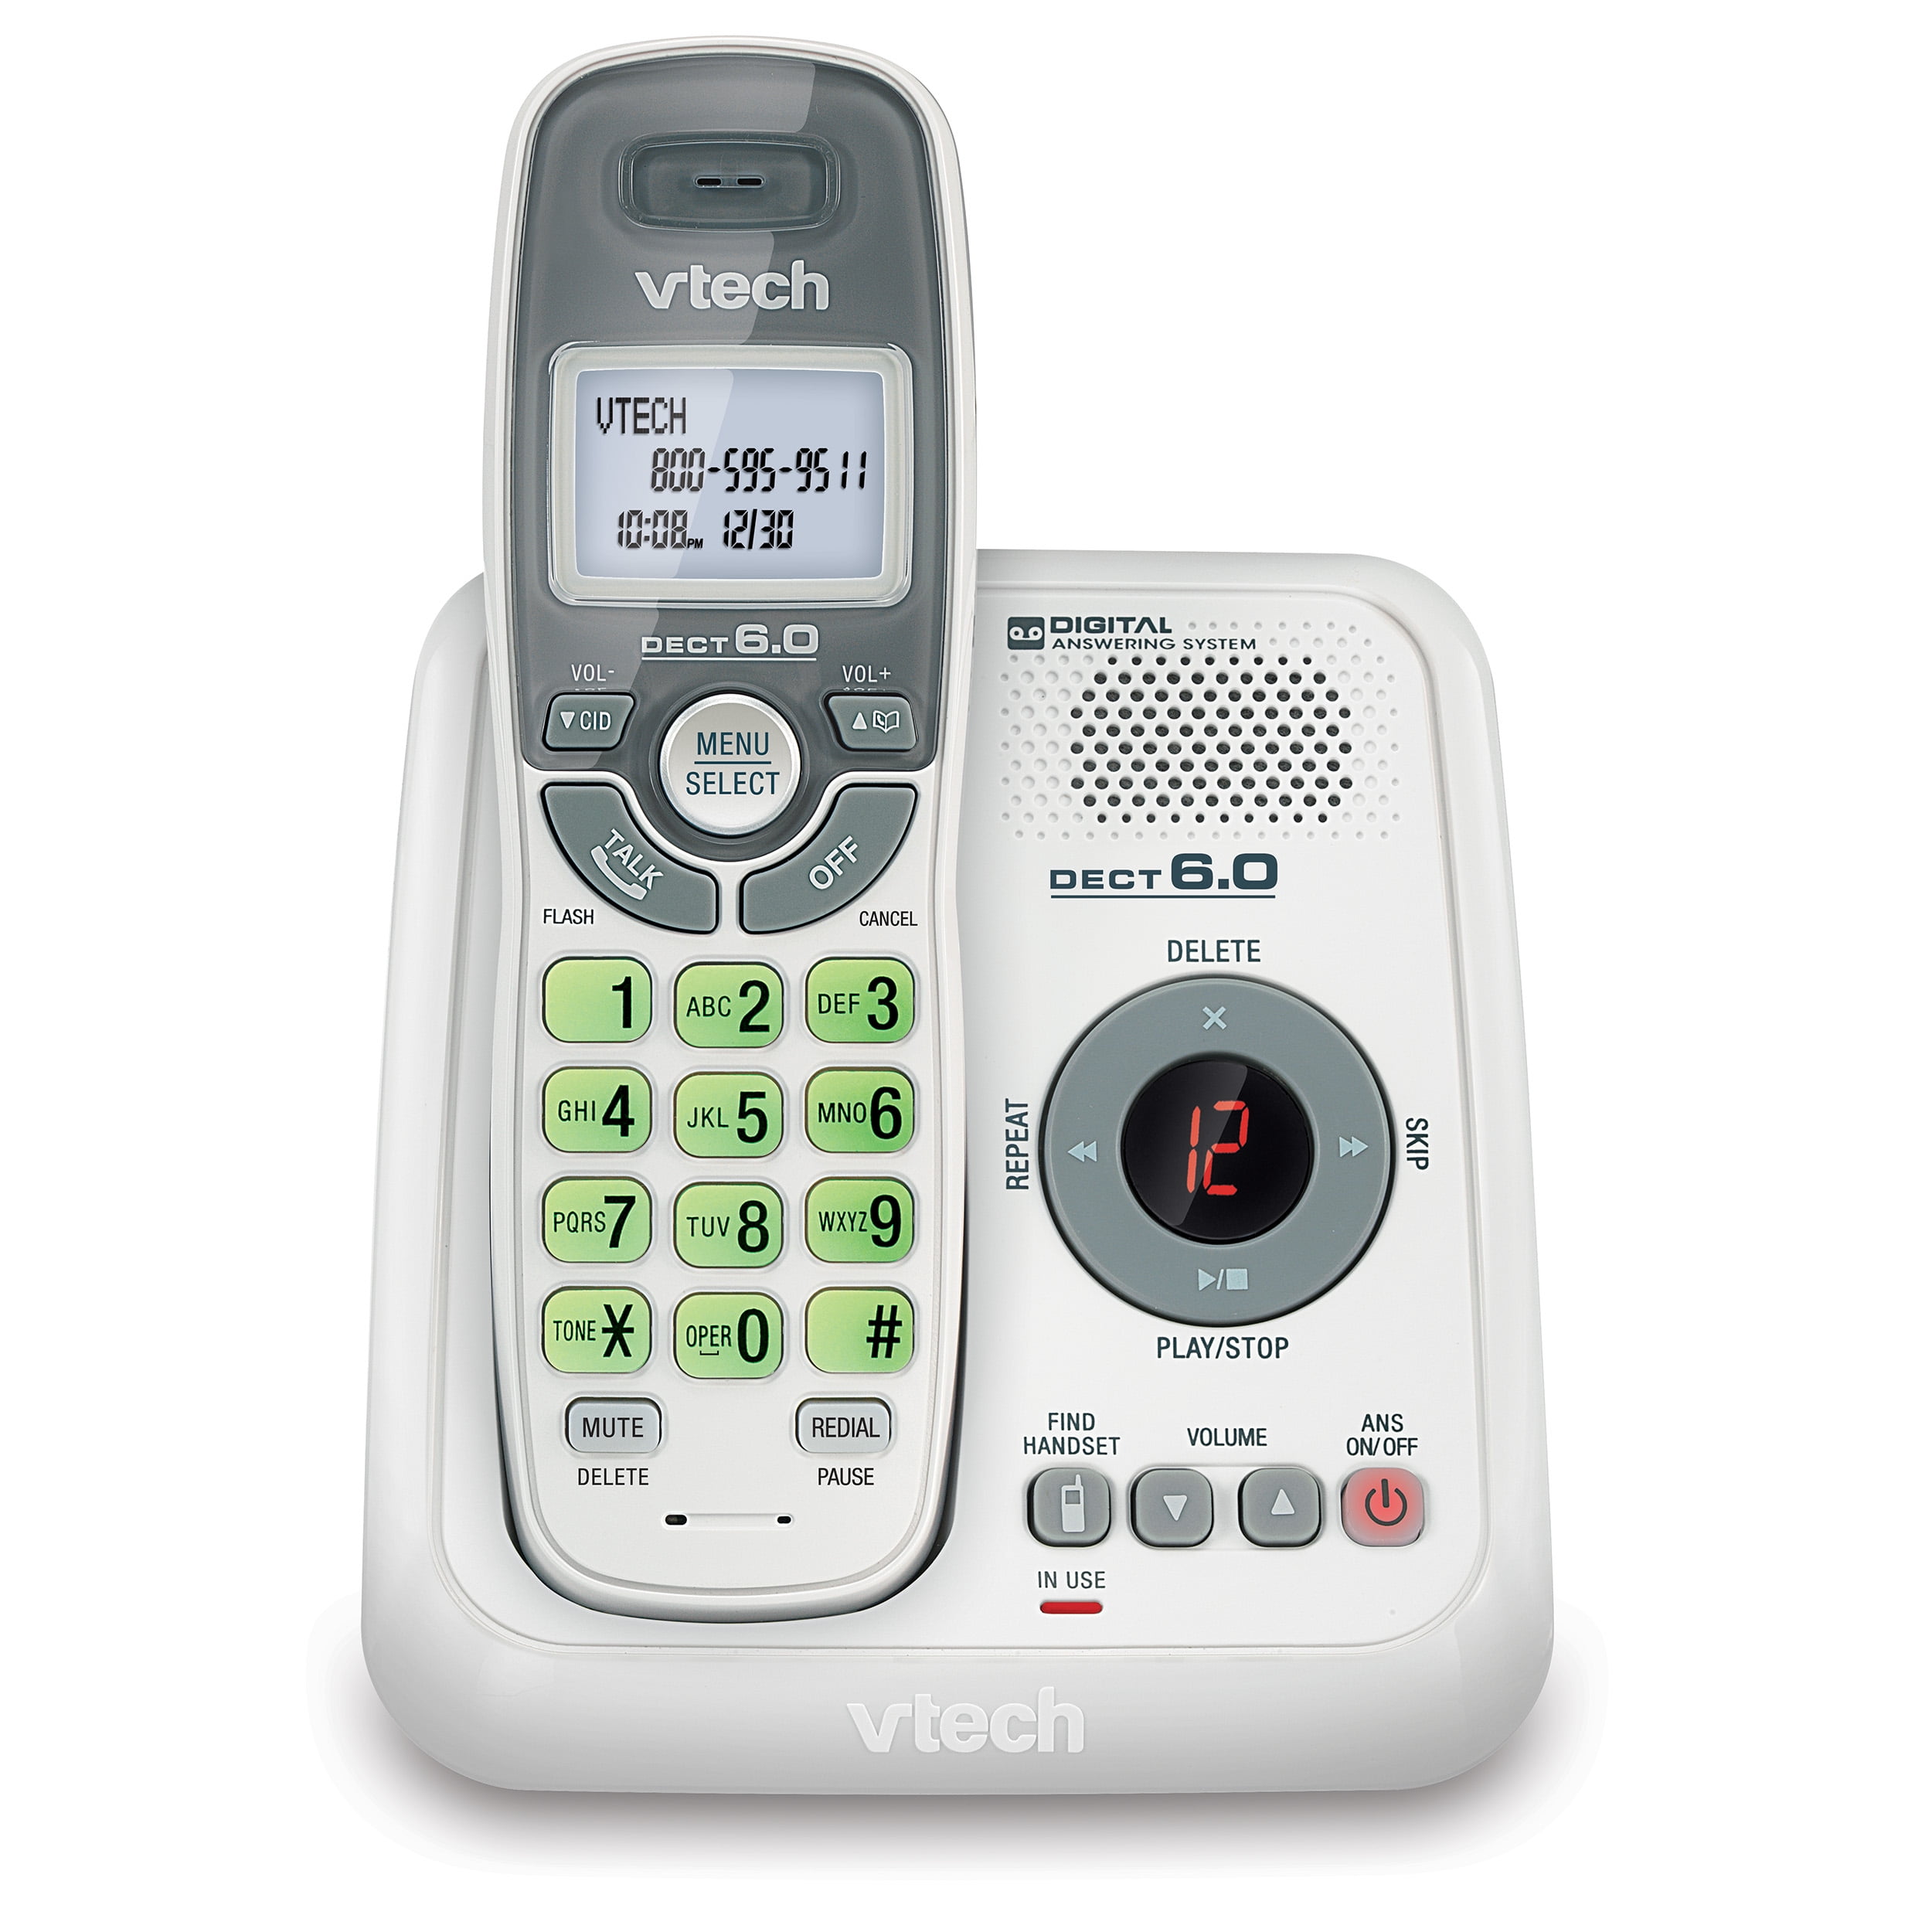 New VTECH DECT 6.0 CORDLESS HOME PHONE & ANSWERING MACHINE SET SYSTEM lot 